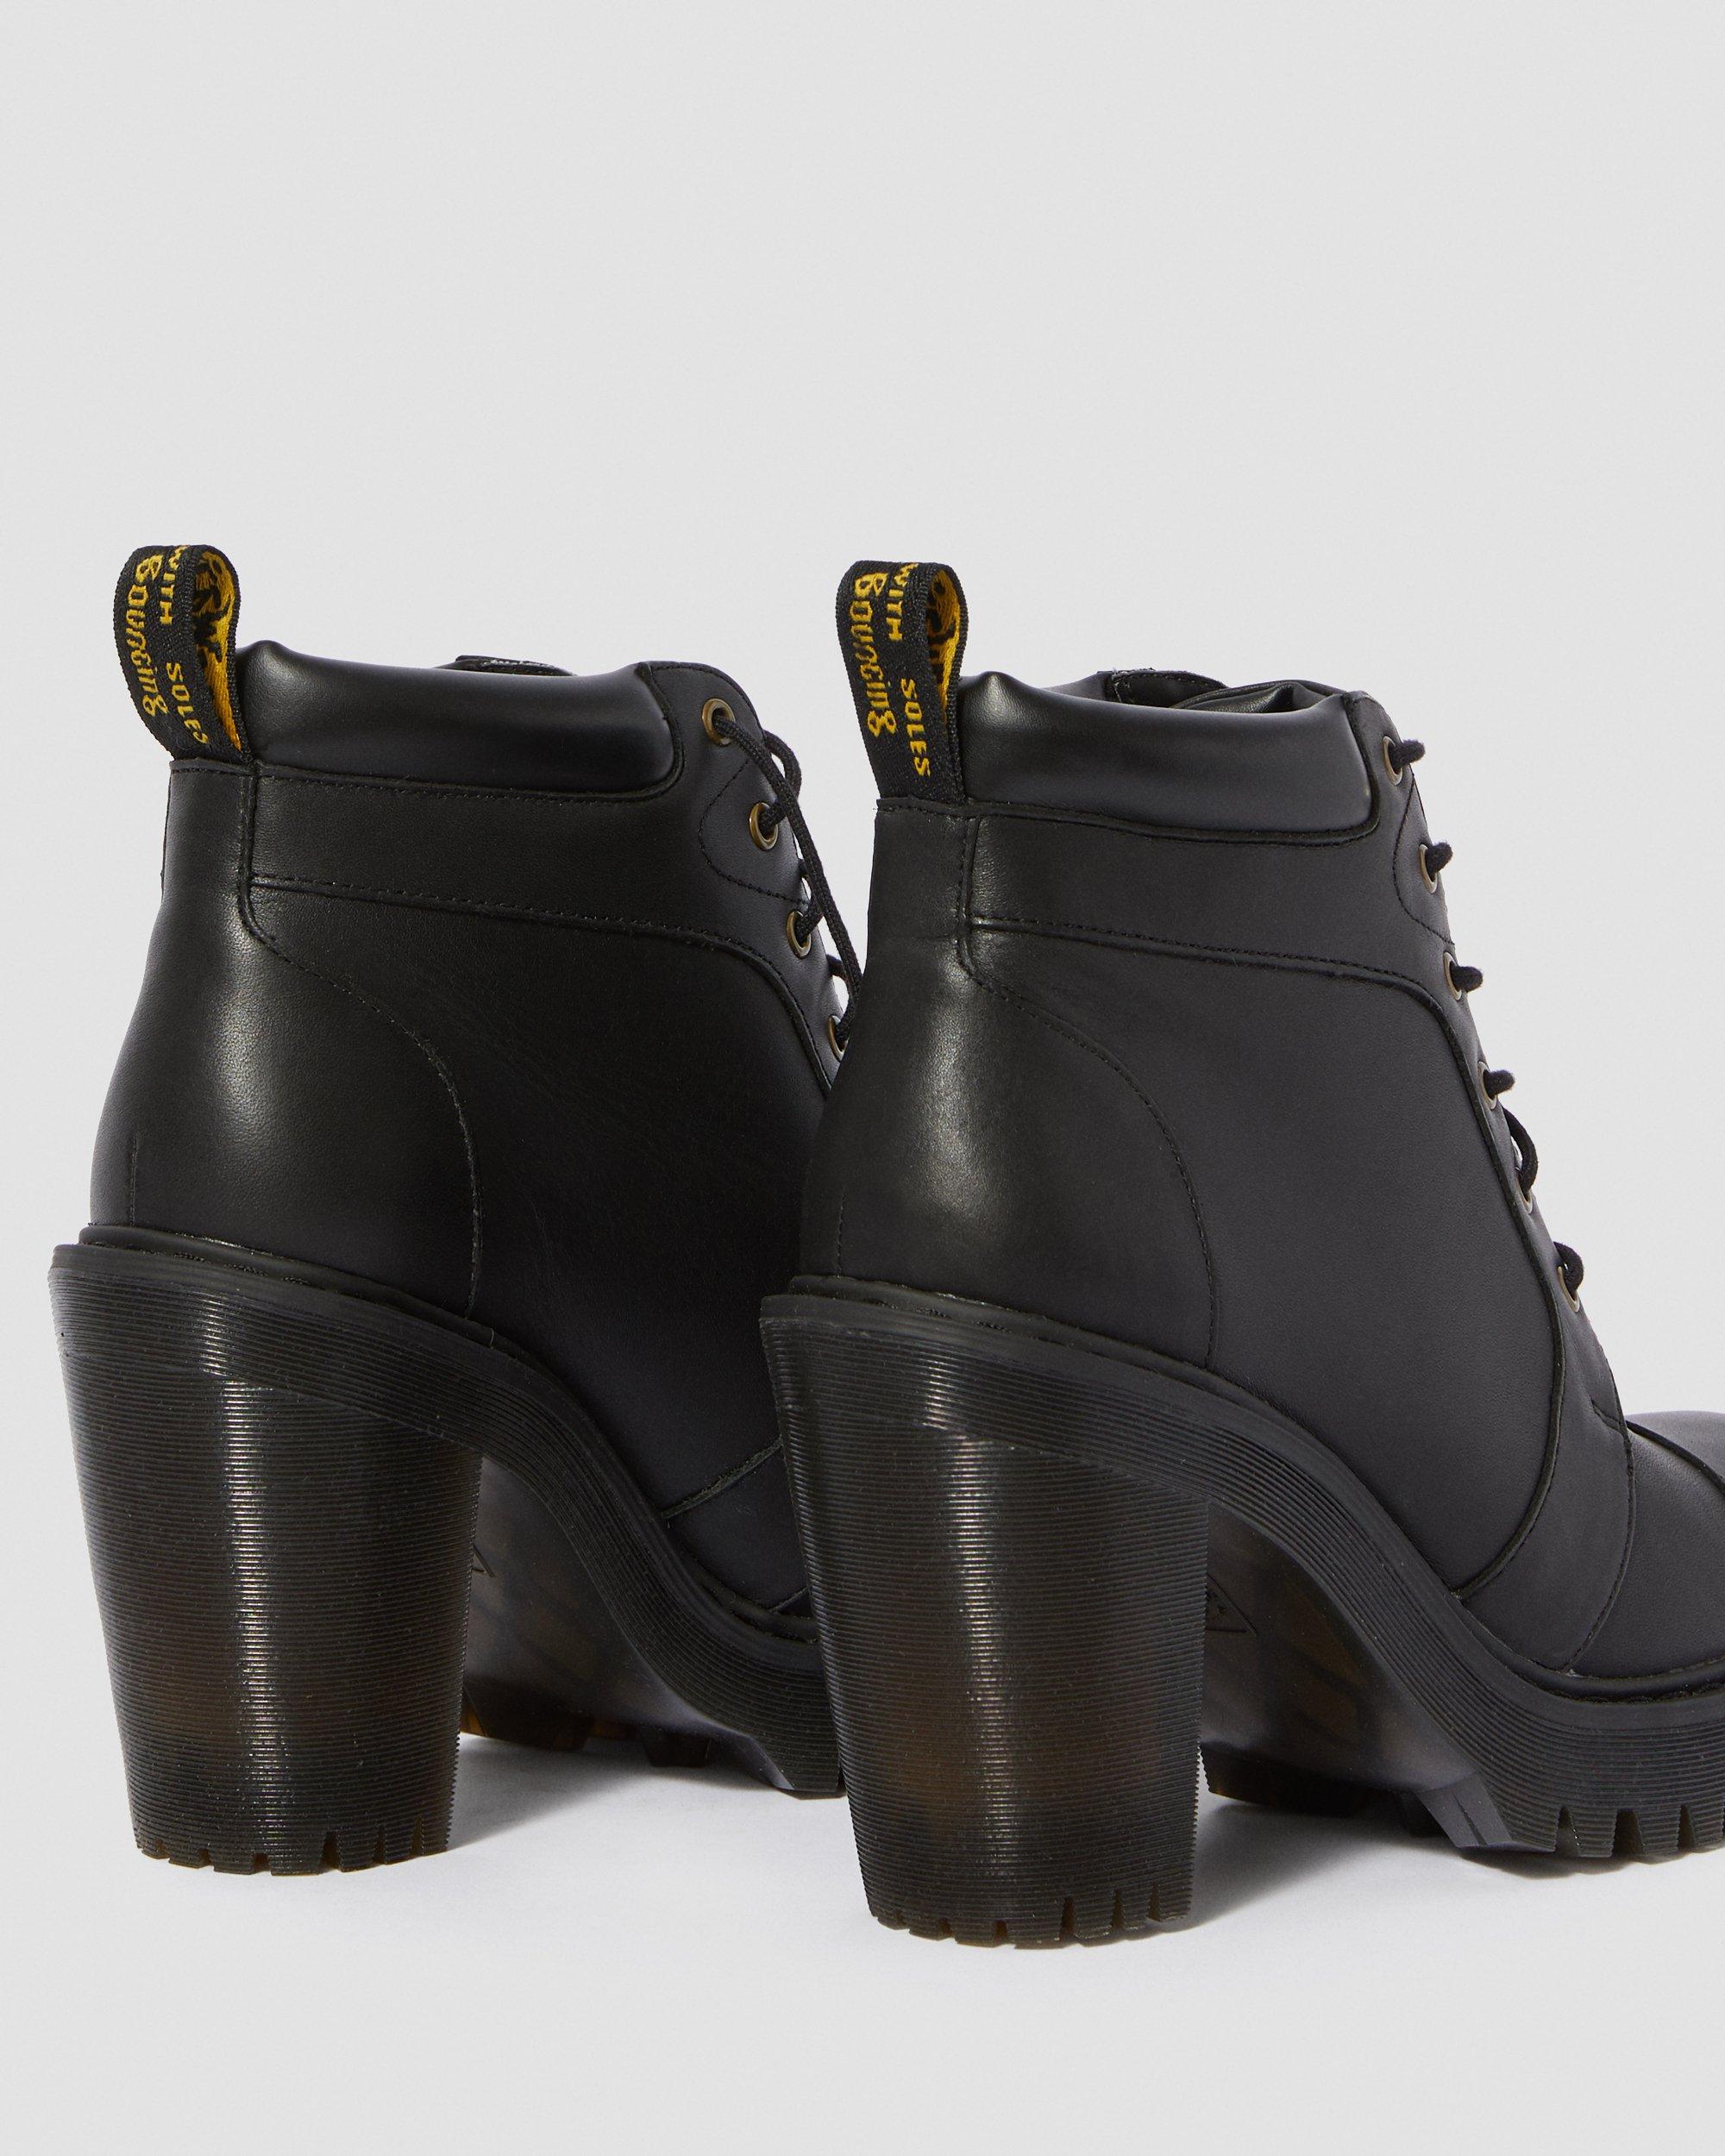 LEATHER HEELED ANKLE BOOTS | Dr. Martens